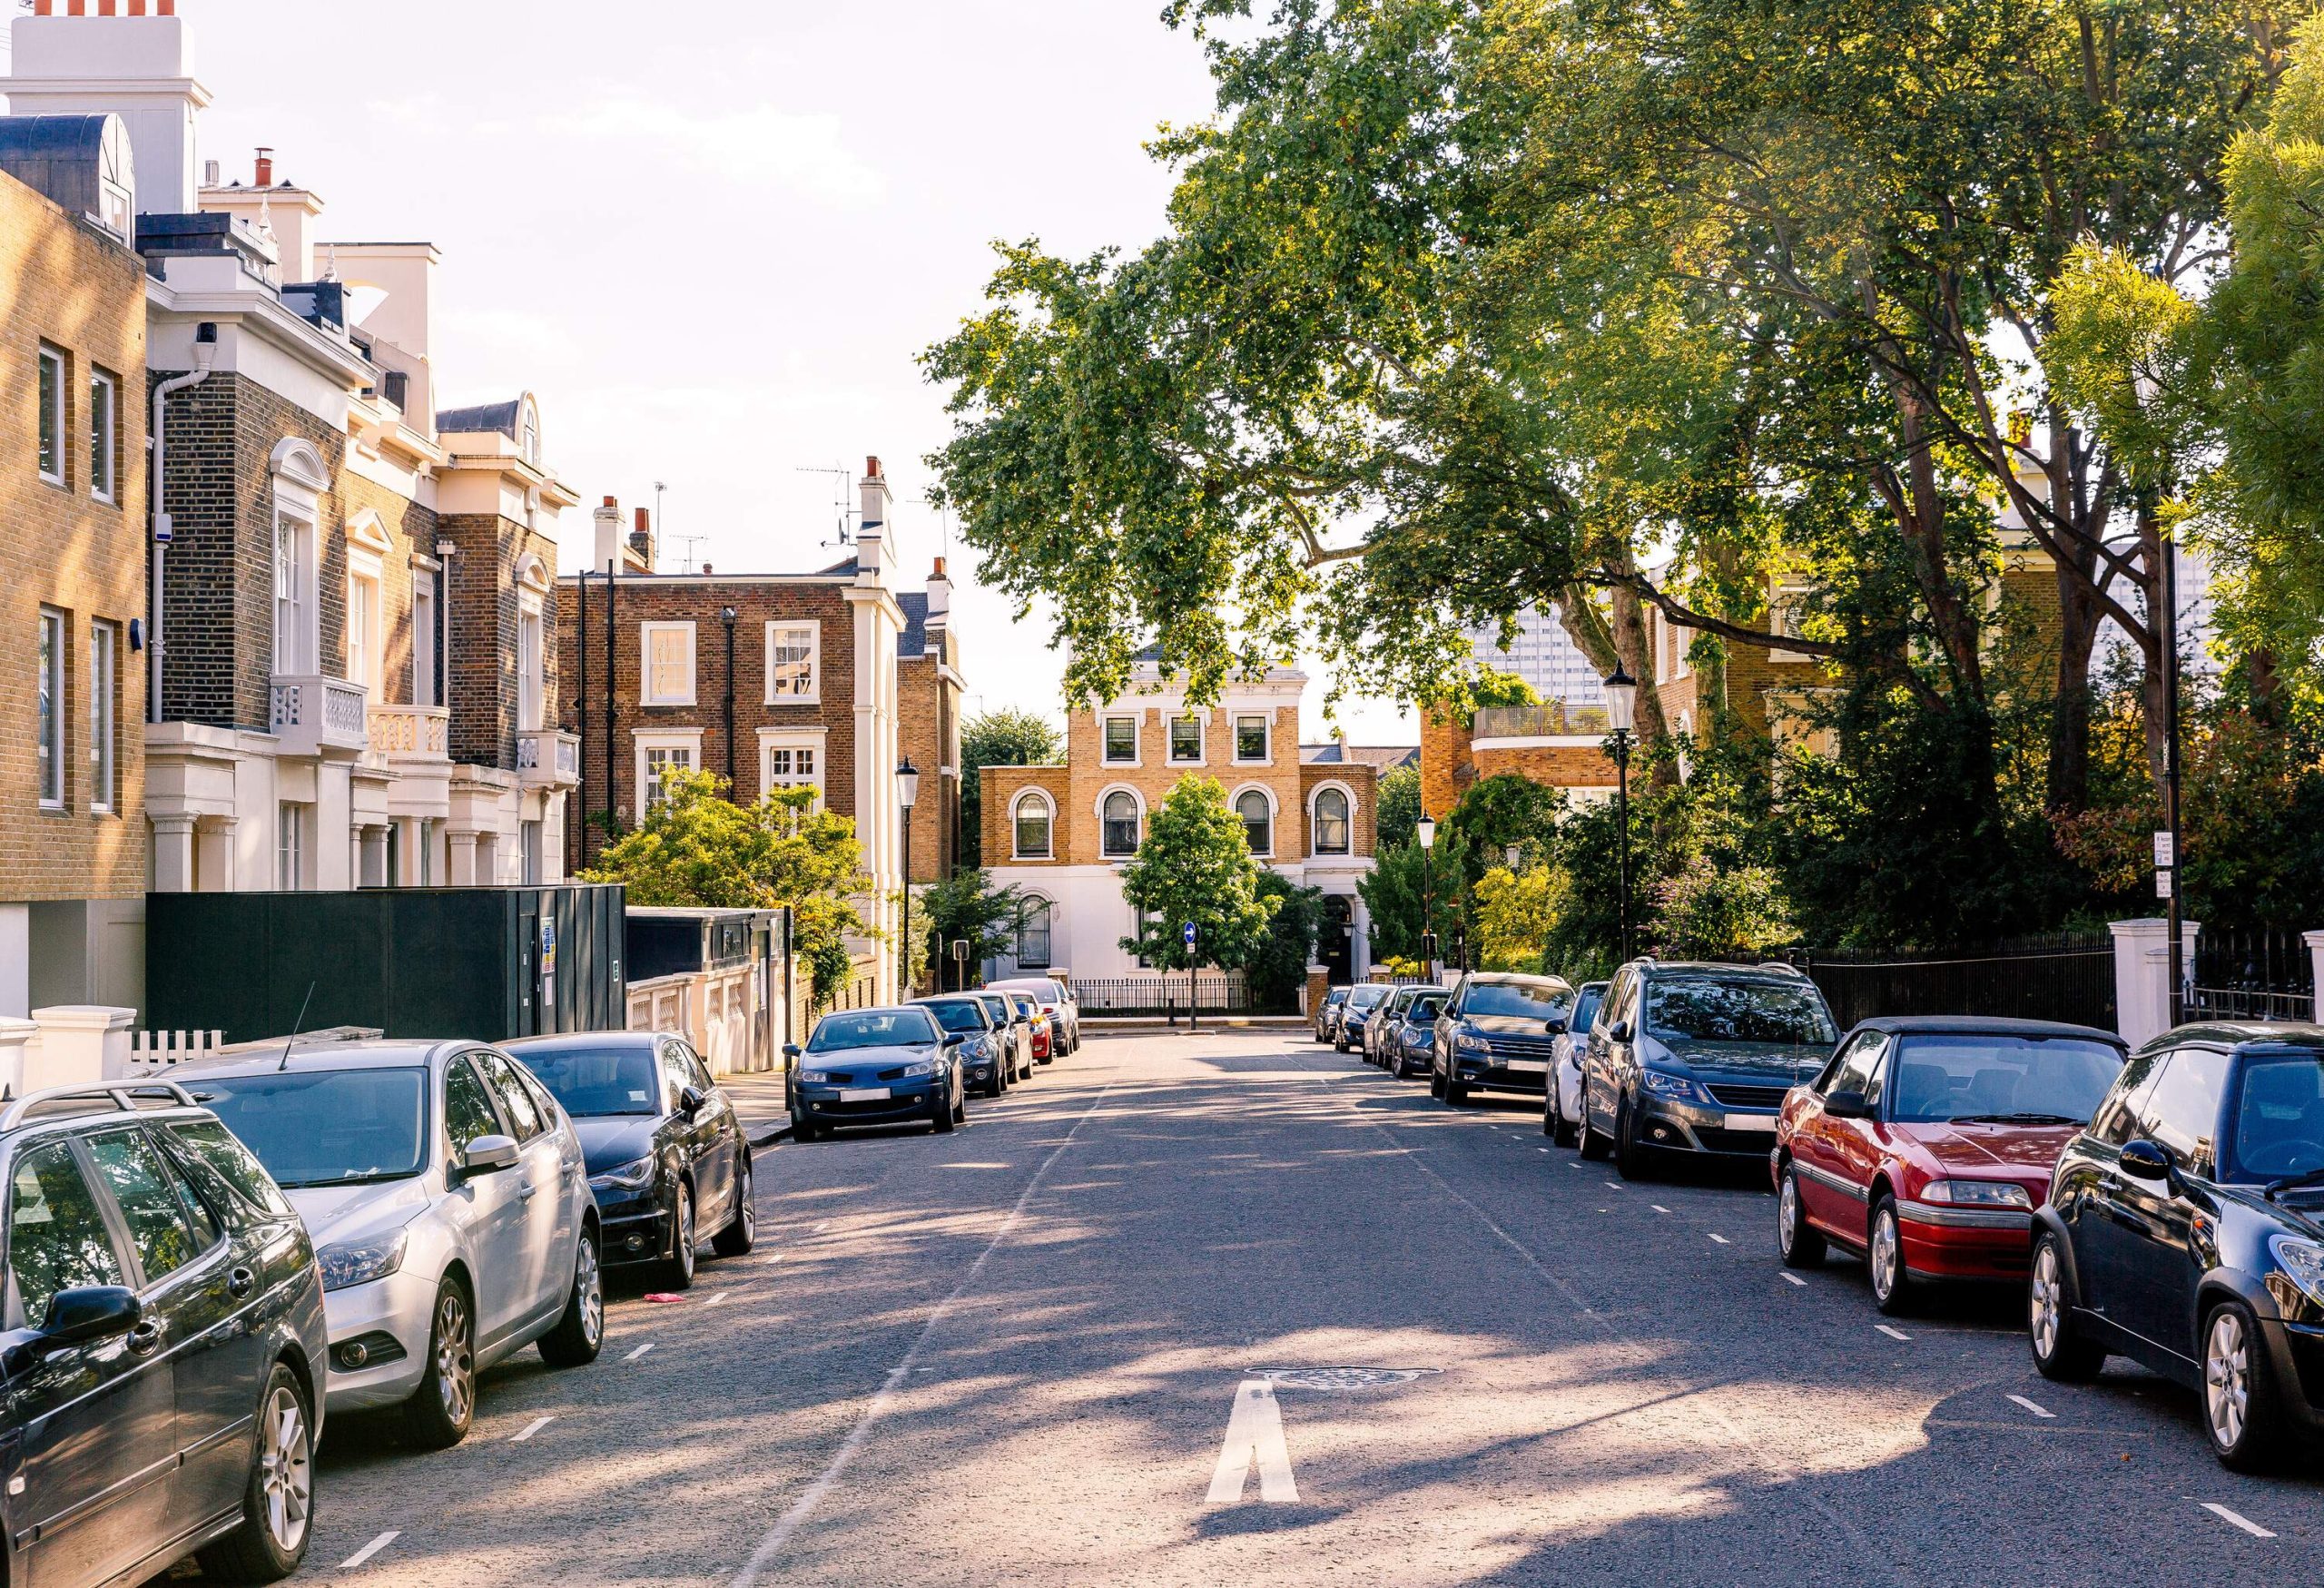 A paved road lined with parked cars on the sidewalk and beautiful classic townhouses with brick facades.